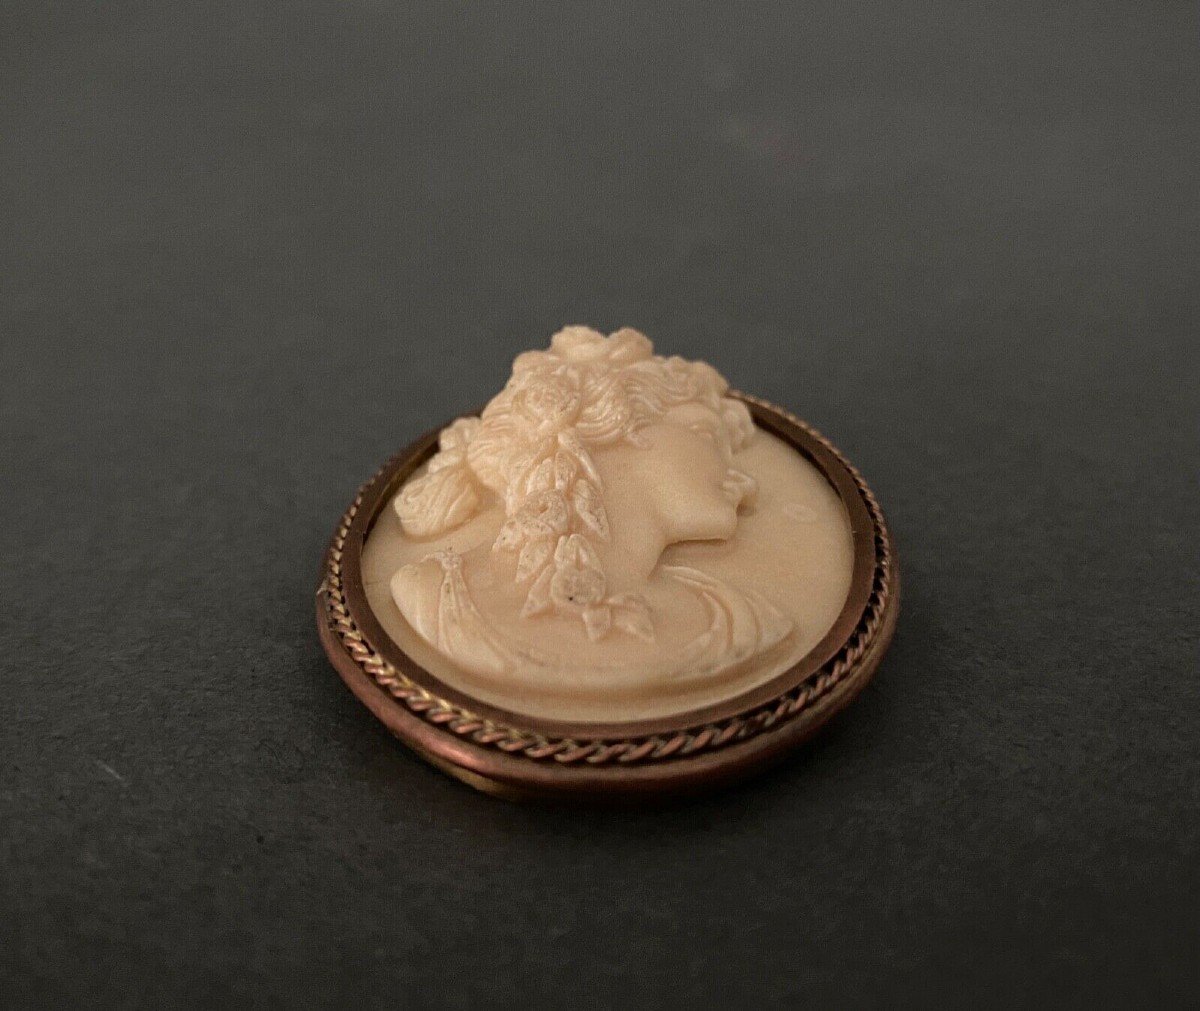 Antique Cameo Of A Woman's Profile In 19th Century Limestone, Gilded Metal Surround-photo-2